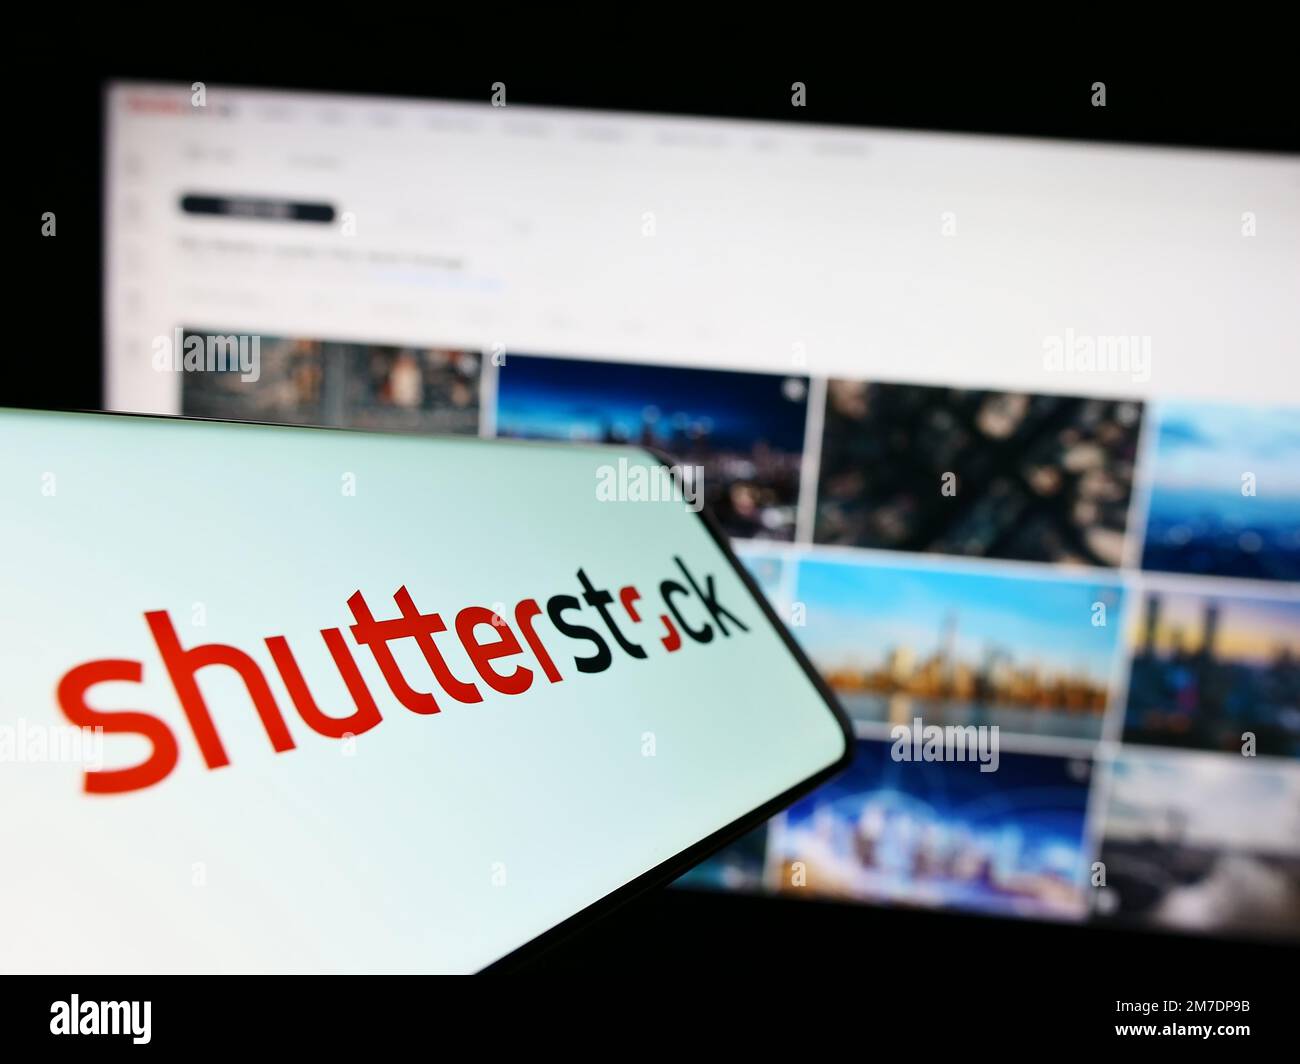 Mobile phone with logo of US stock photography company Shutterstock Inc. on screen in front of website. Focus on center-right of phone display. Stock Photo